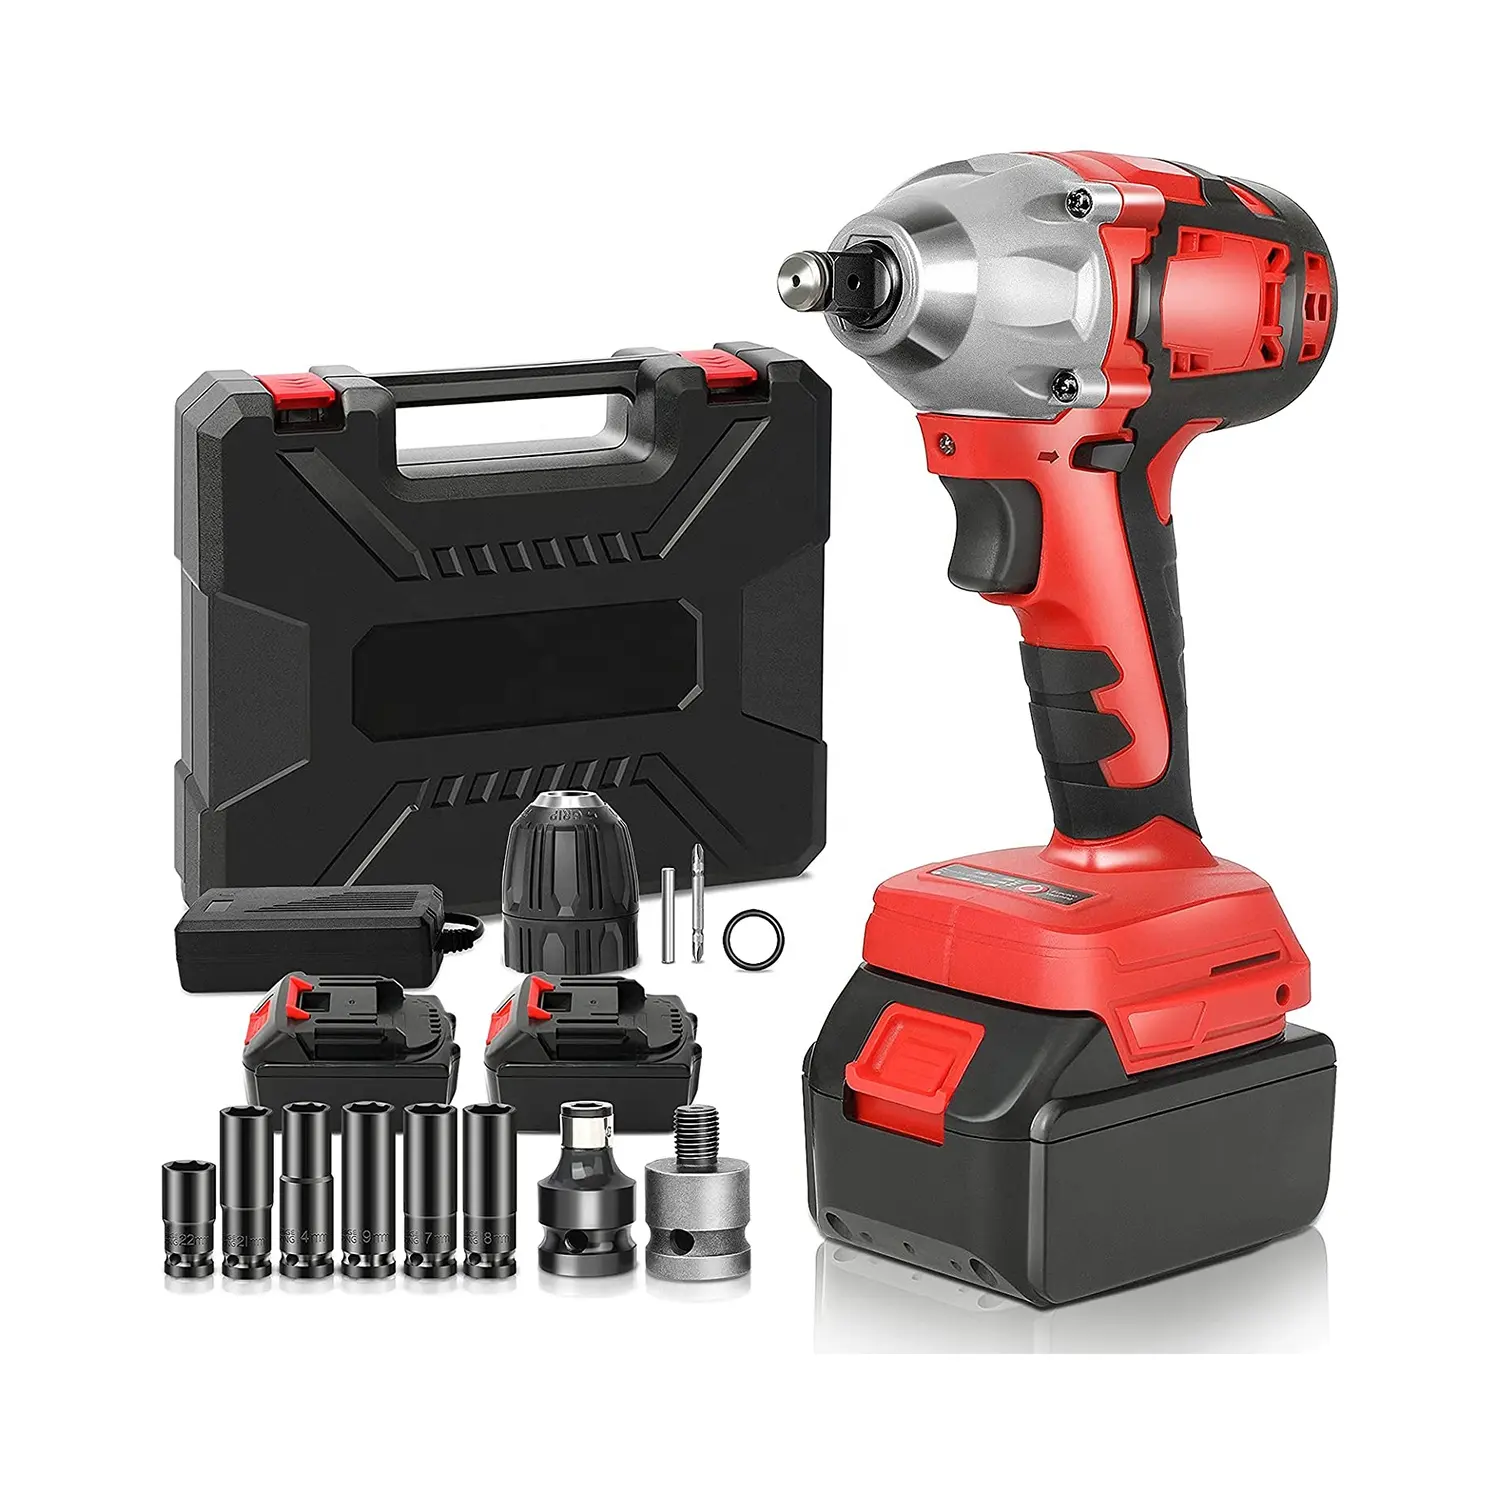 New Arrival 2022 48V cordless impact wrench high torque 6 inch wrenches impact cordless impact gun with 2.0AH*2Battery & Charger